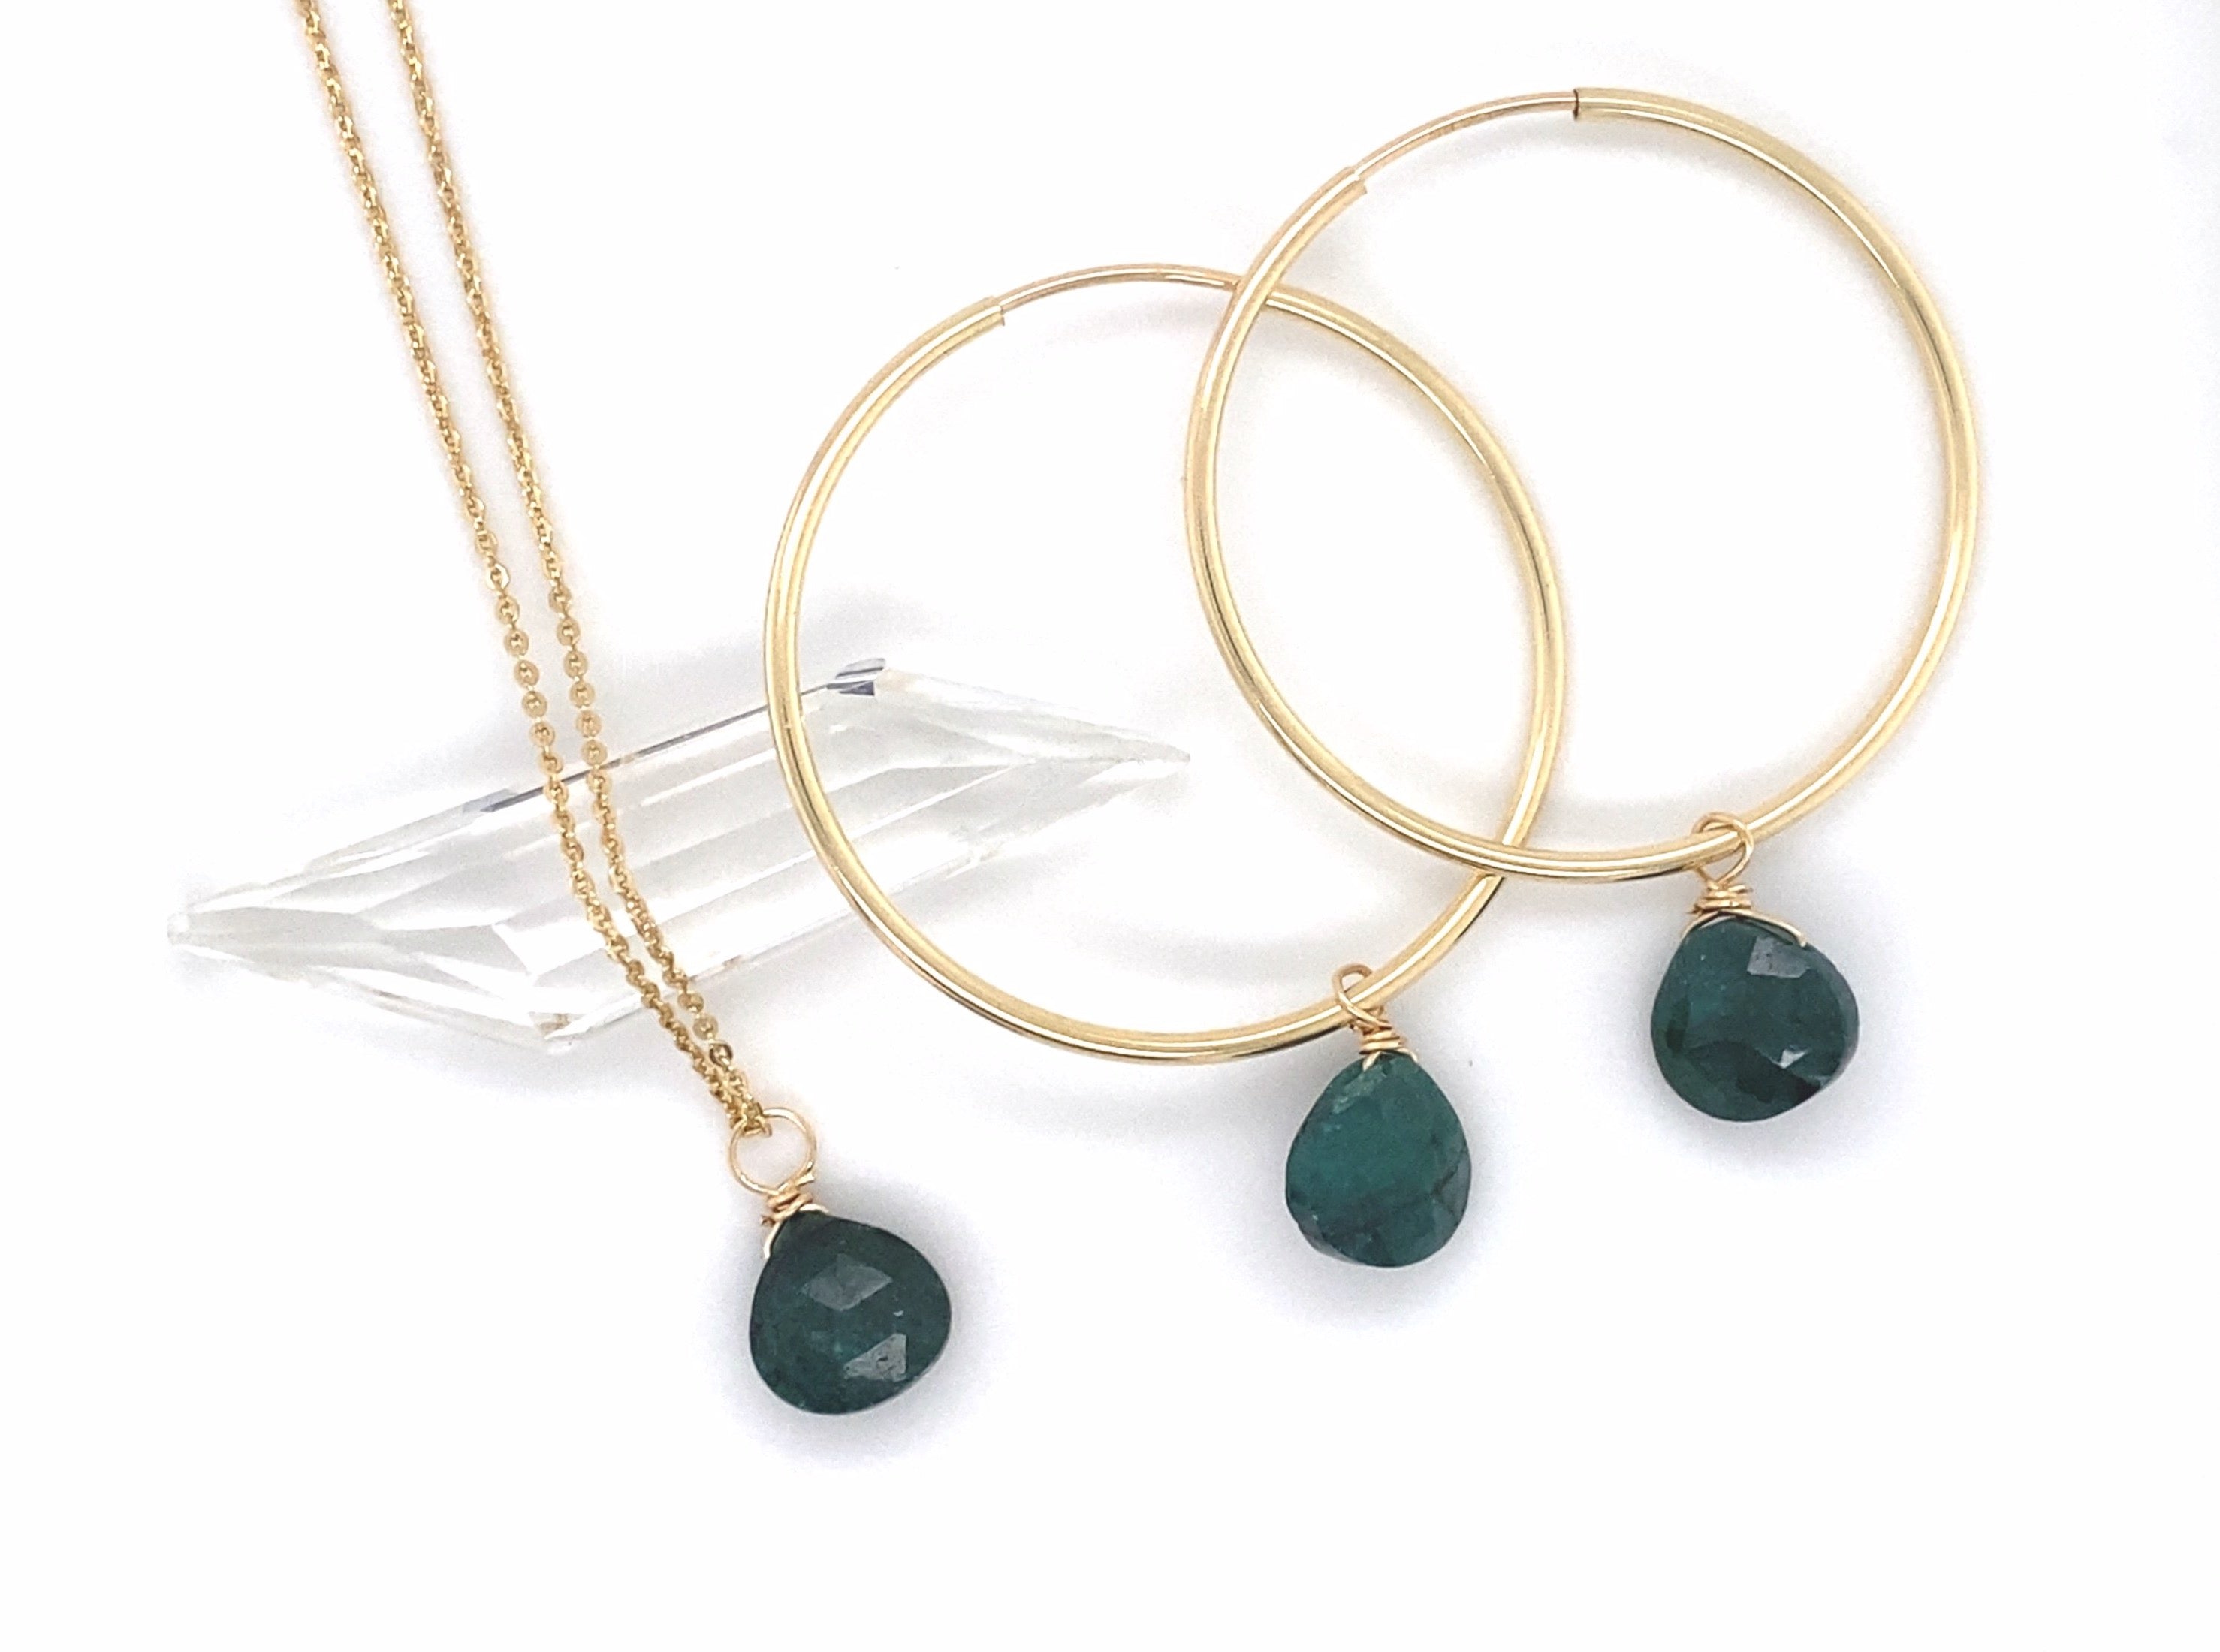 Bohemian Birthstone - May - Emerald Necklace